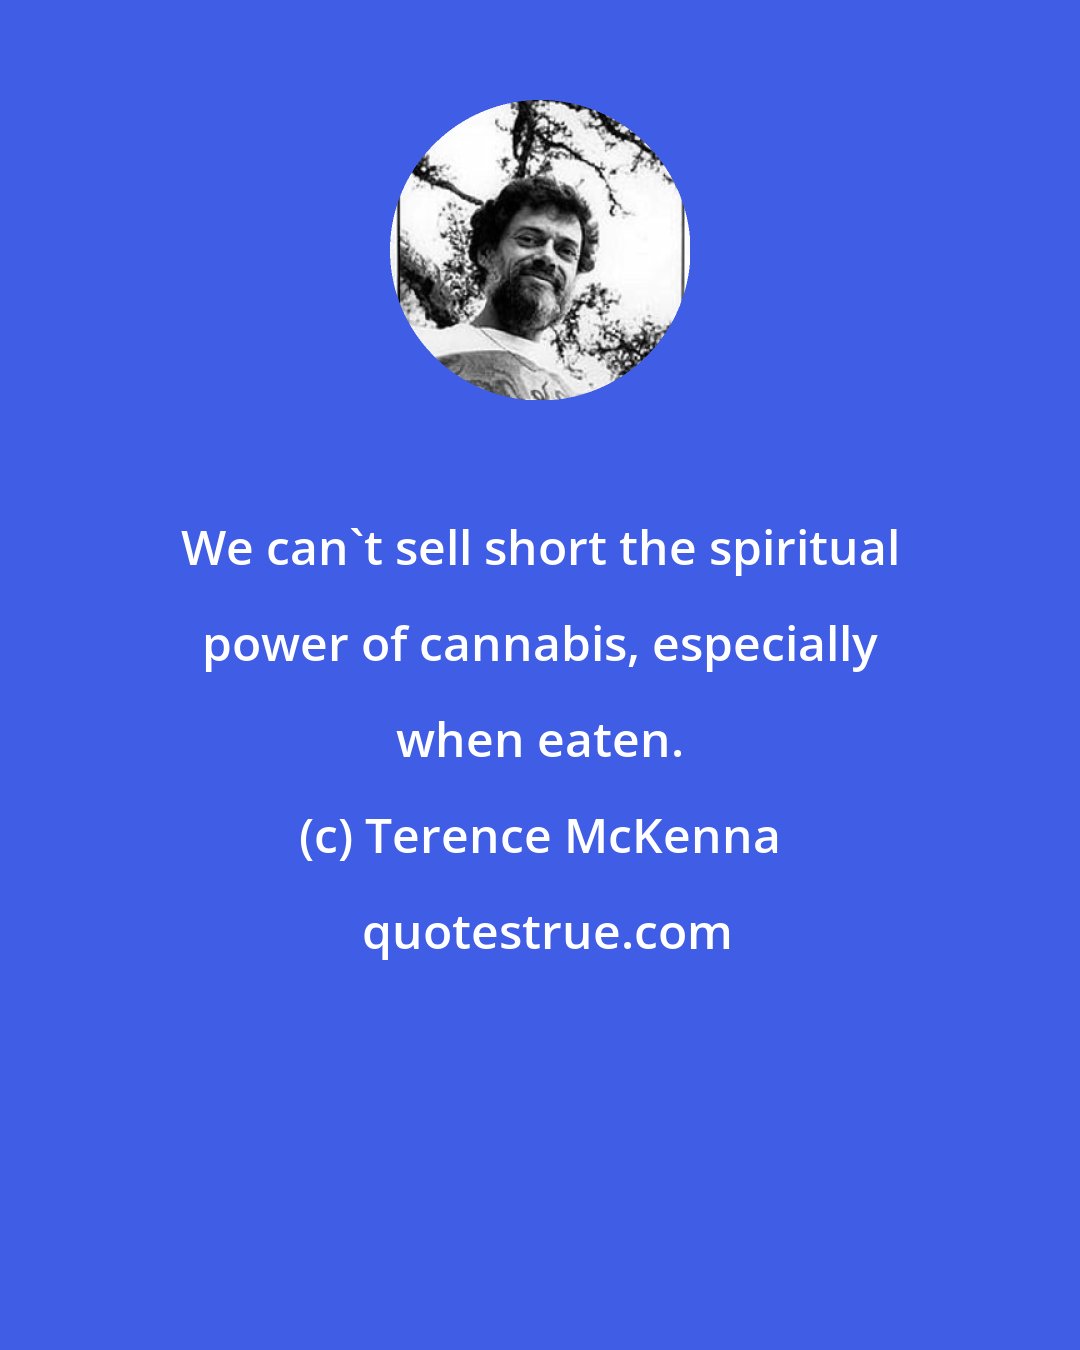 Terence McKenna: We can't sell short the spiritual power of cannabis, especially when eaten.